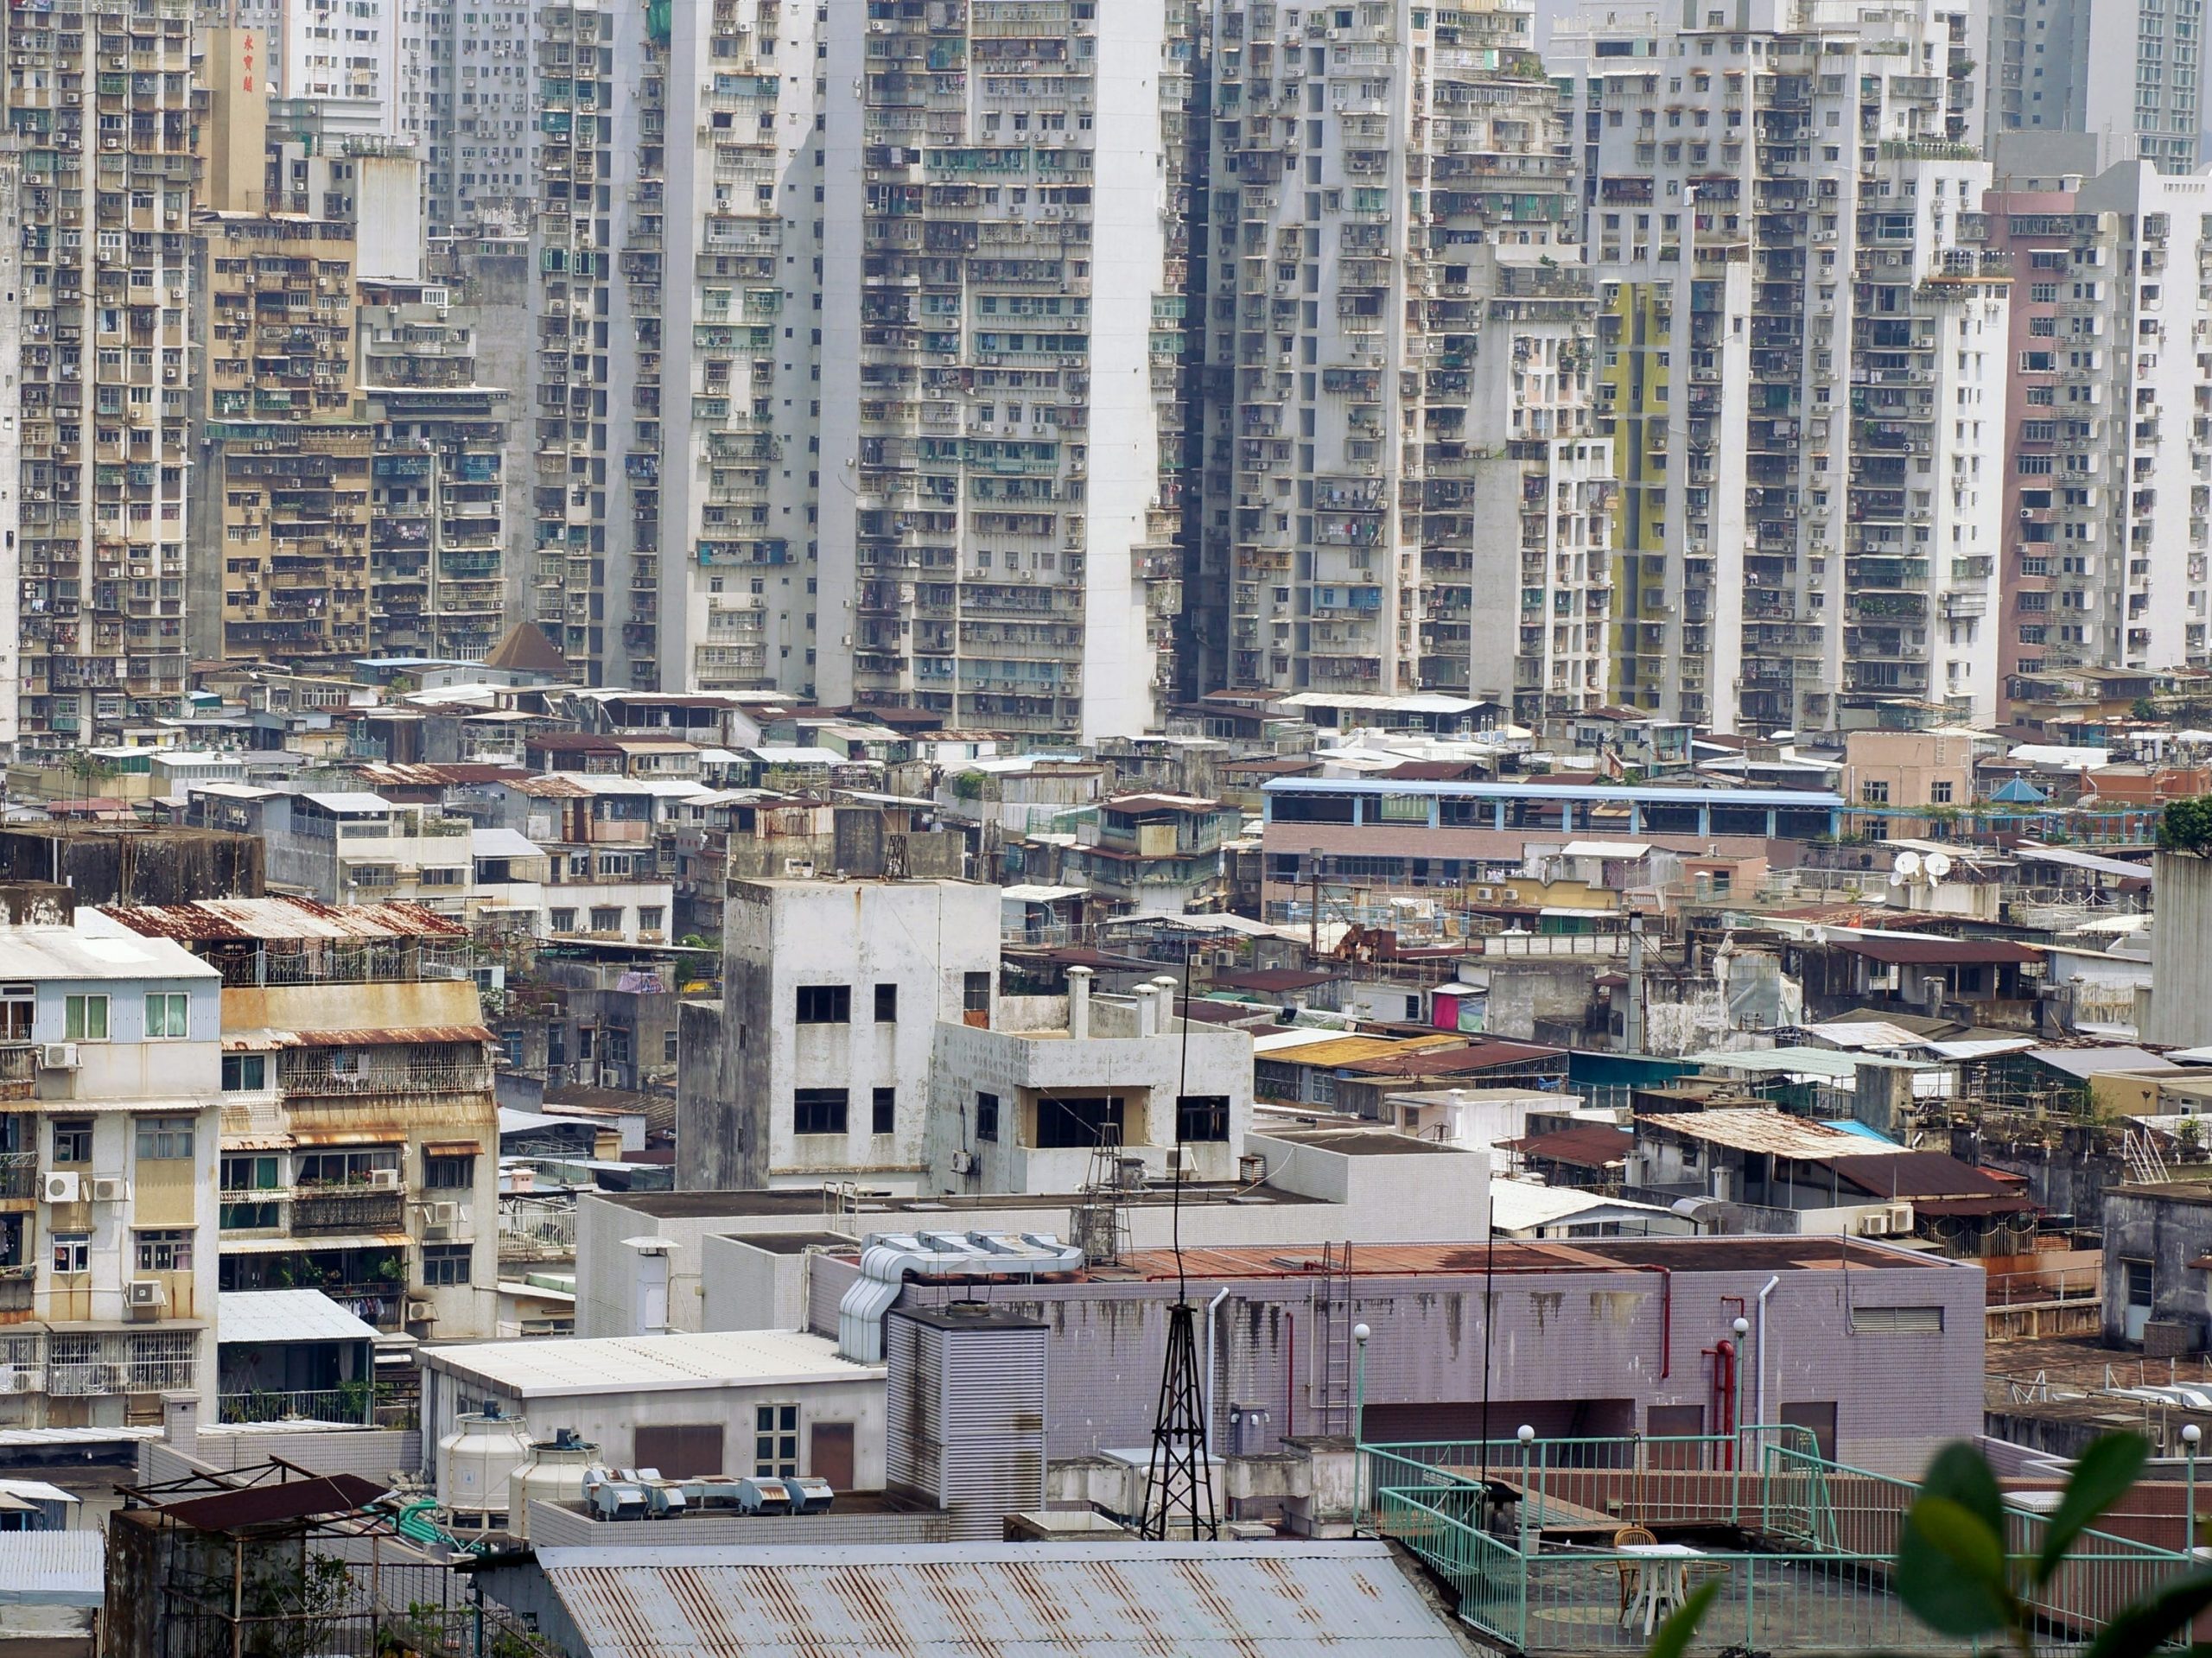 Cityscape of Macau shows run-down buildings in various states of disarray